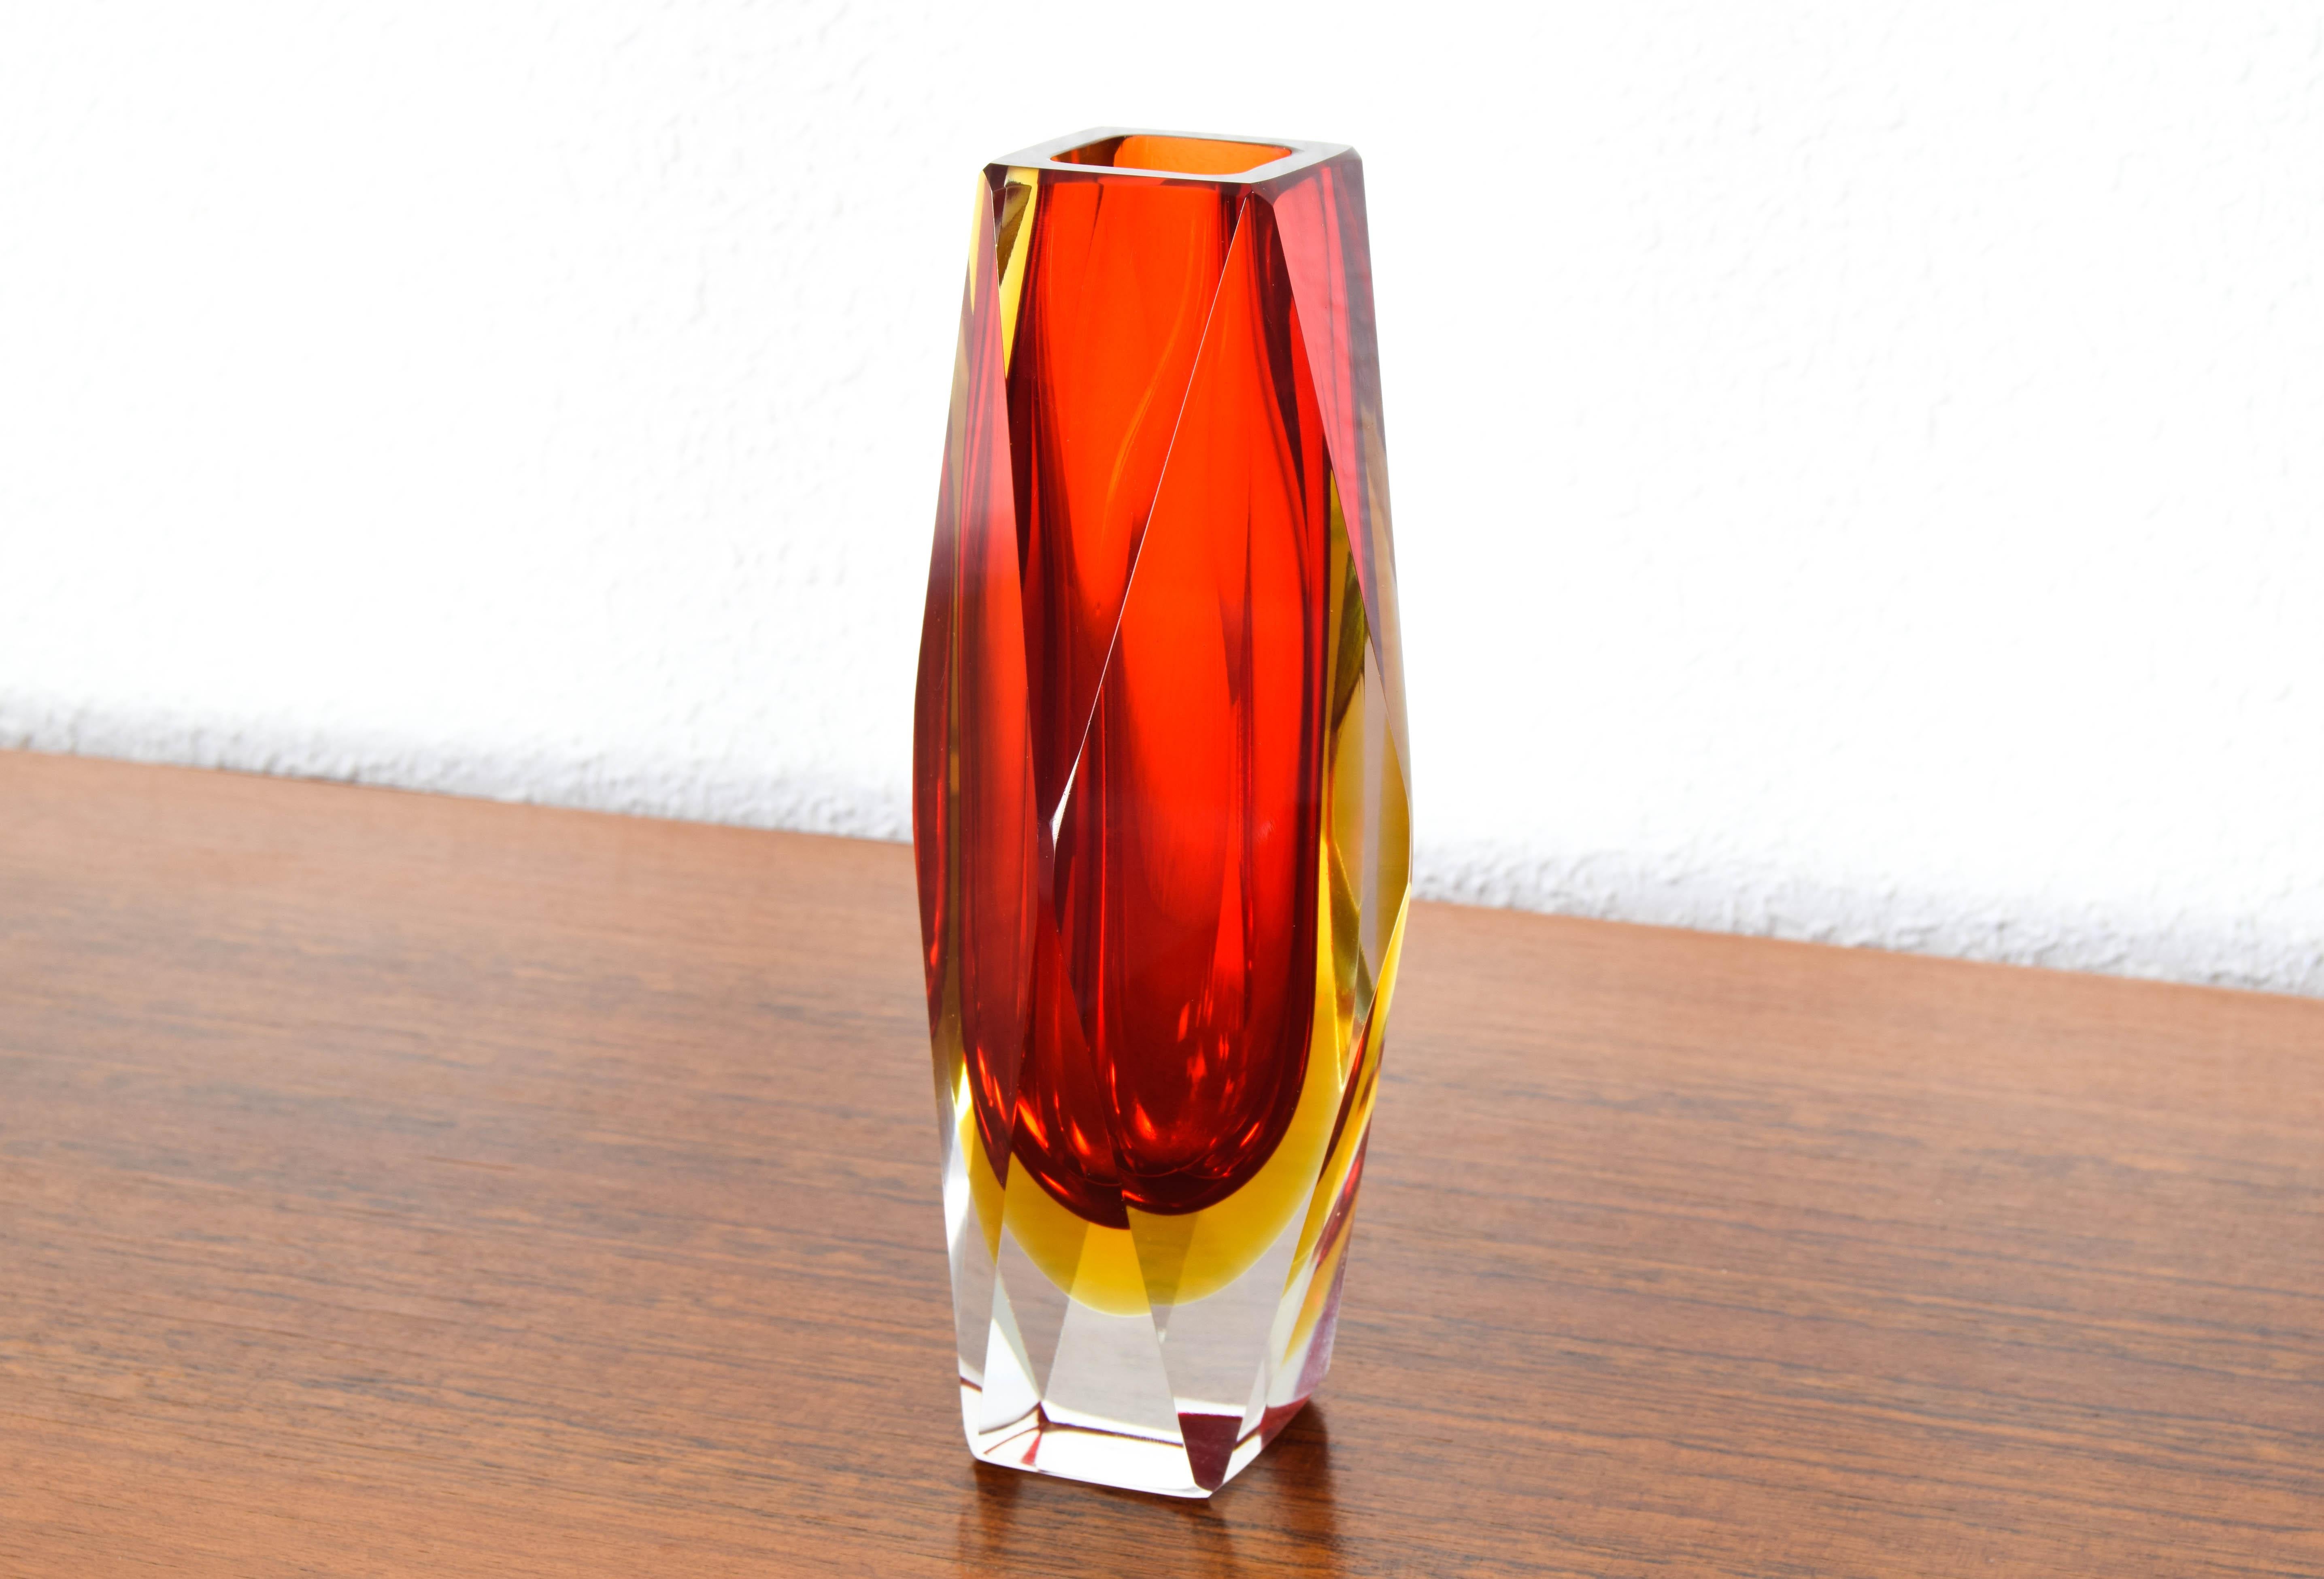 Beautiful Italian Murano glass vase blown with Sommerso technique designed by Alessandro Mandruzzato and produced in the early 60s.
Striking and bright colors, it is made up of a bright red inner layer, a yellow middle layer and a transparent outer